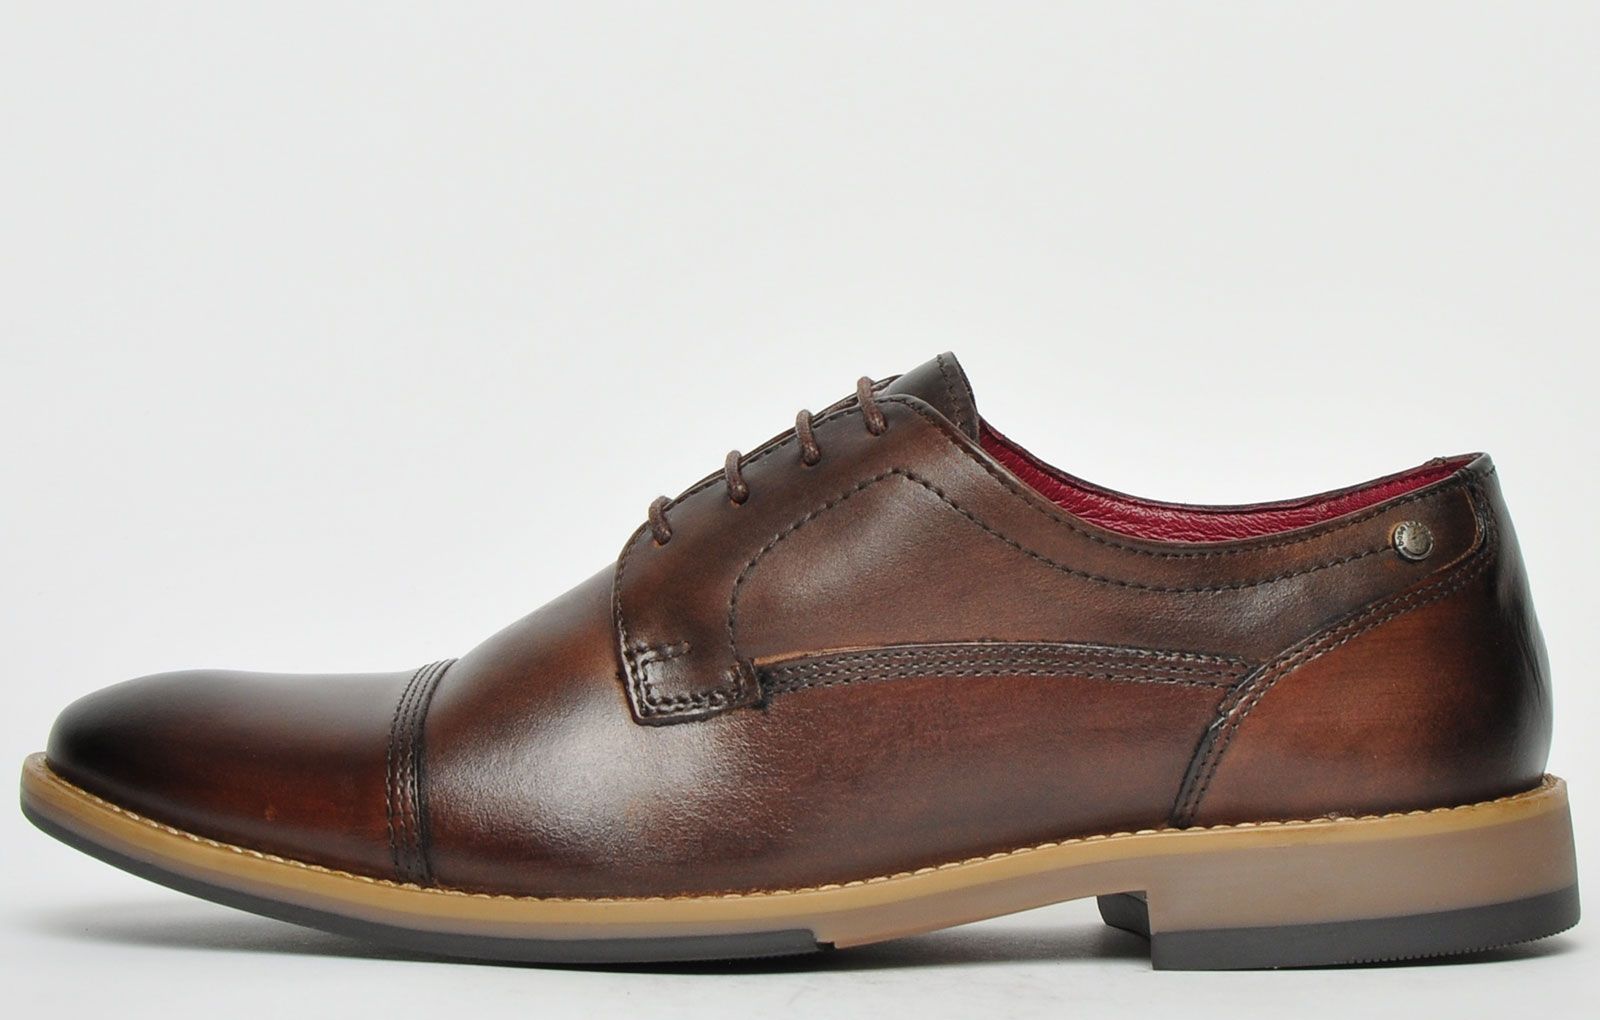 With a vintage classic finish to its premium leather upper, these Base London Thorpe are the perfect choice for formal and casual wear. The perfect shoe for the modern gentlemen, sophisticated, and built to last. Giving timeless style with a premium leather upper the Thorpe showcases classic high end detailing, finished with a slight raised heel. 
 - Premium leather uppers
 - Classic design
 - Intricate designer stitch detailing
 - Lace up fastening
 - Leather/textile lining
 - Durable outsole
 - Base London branding throughout